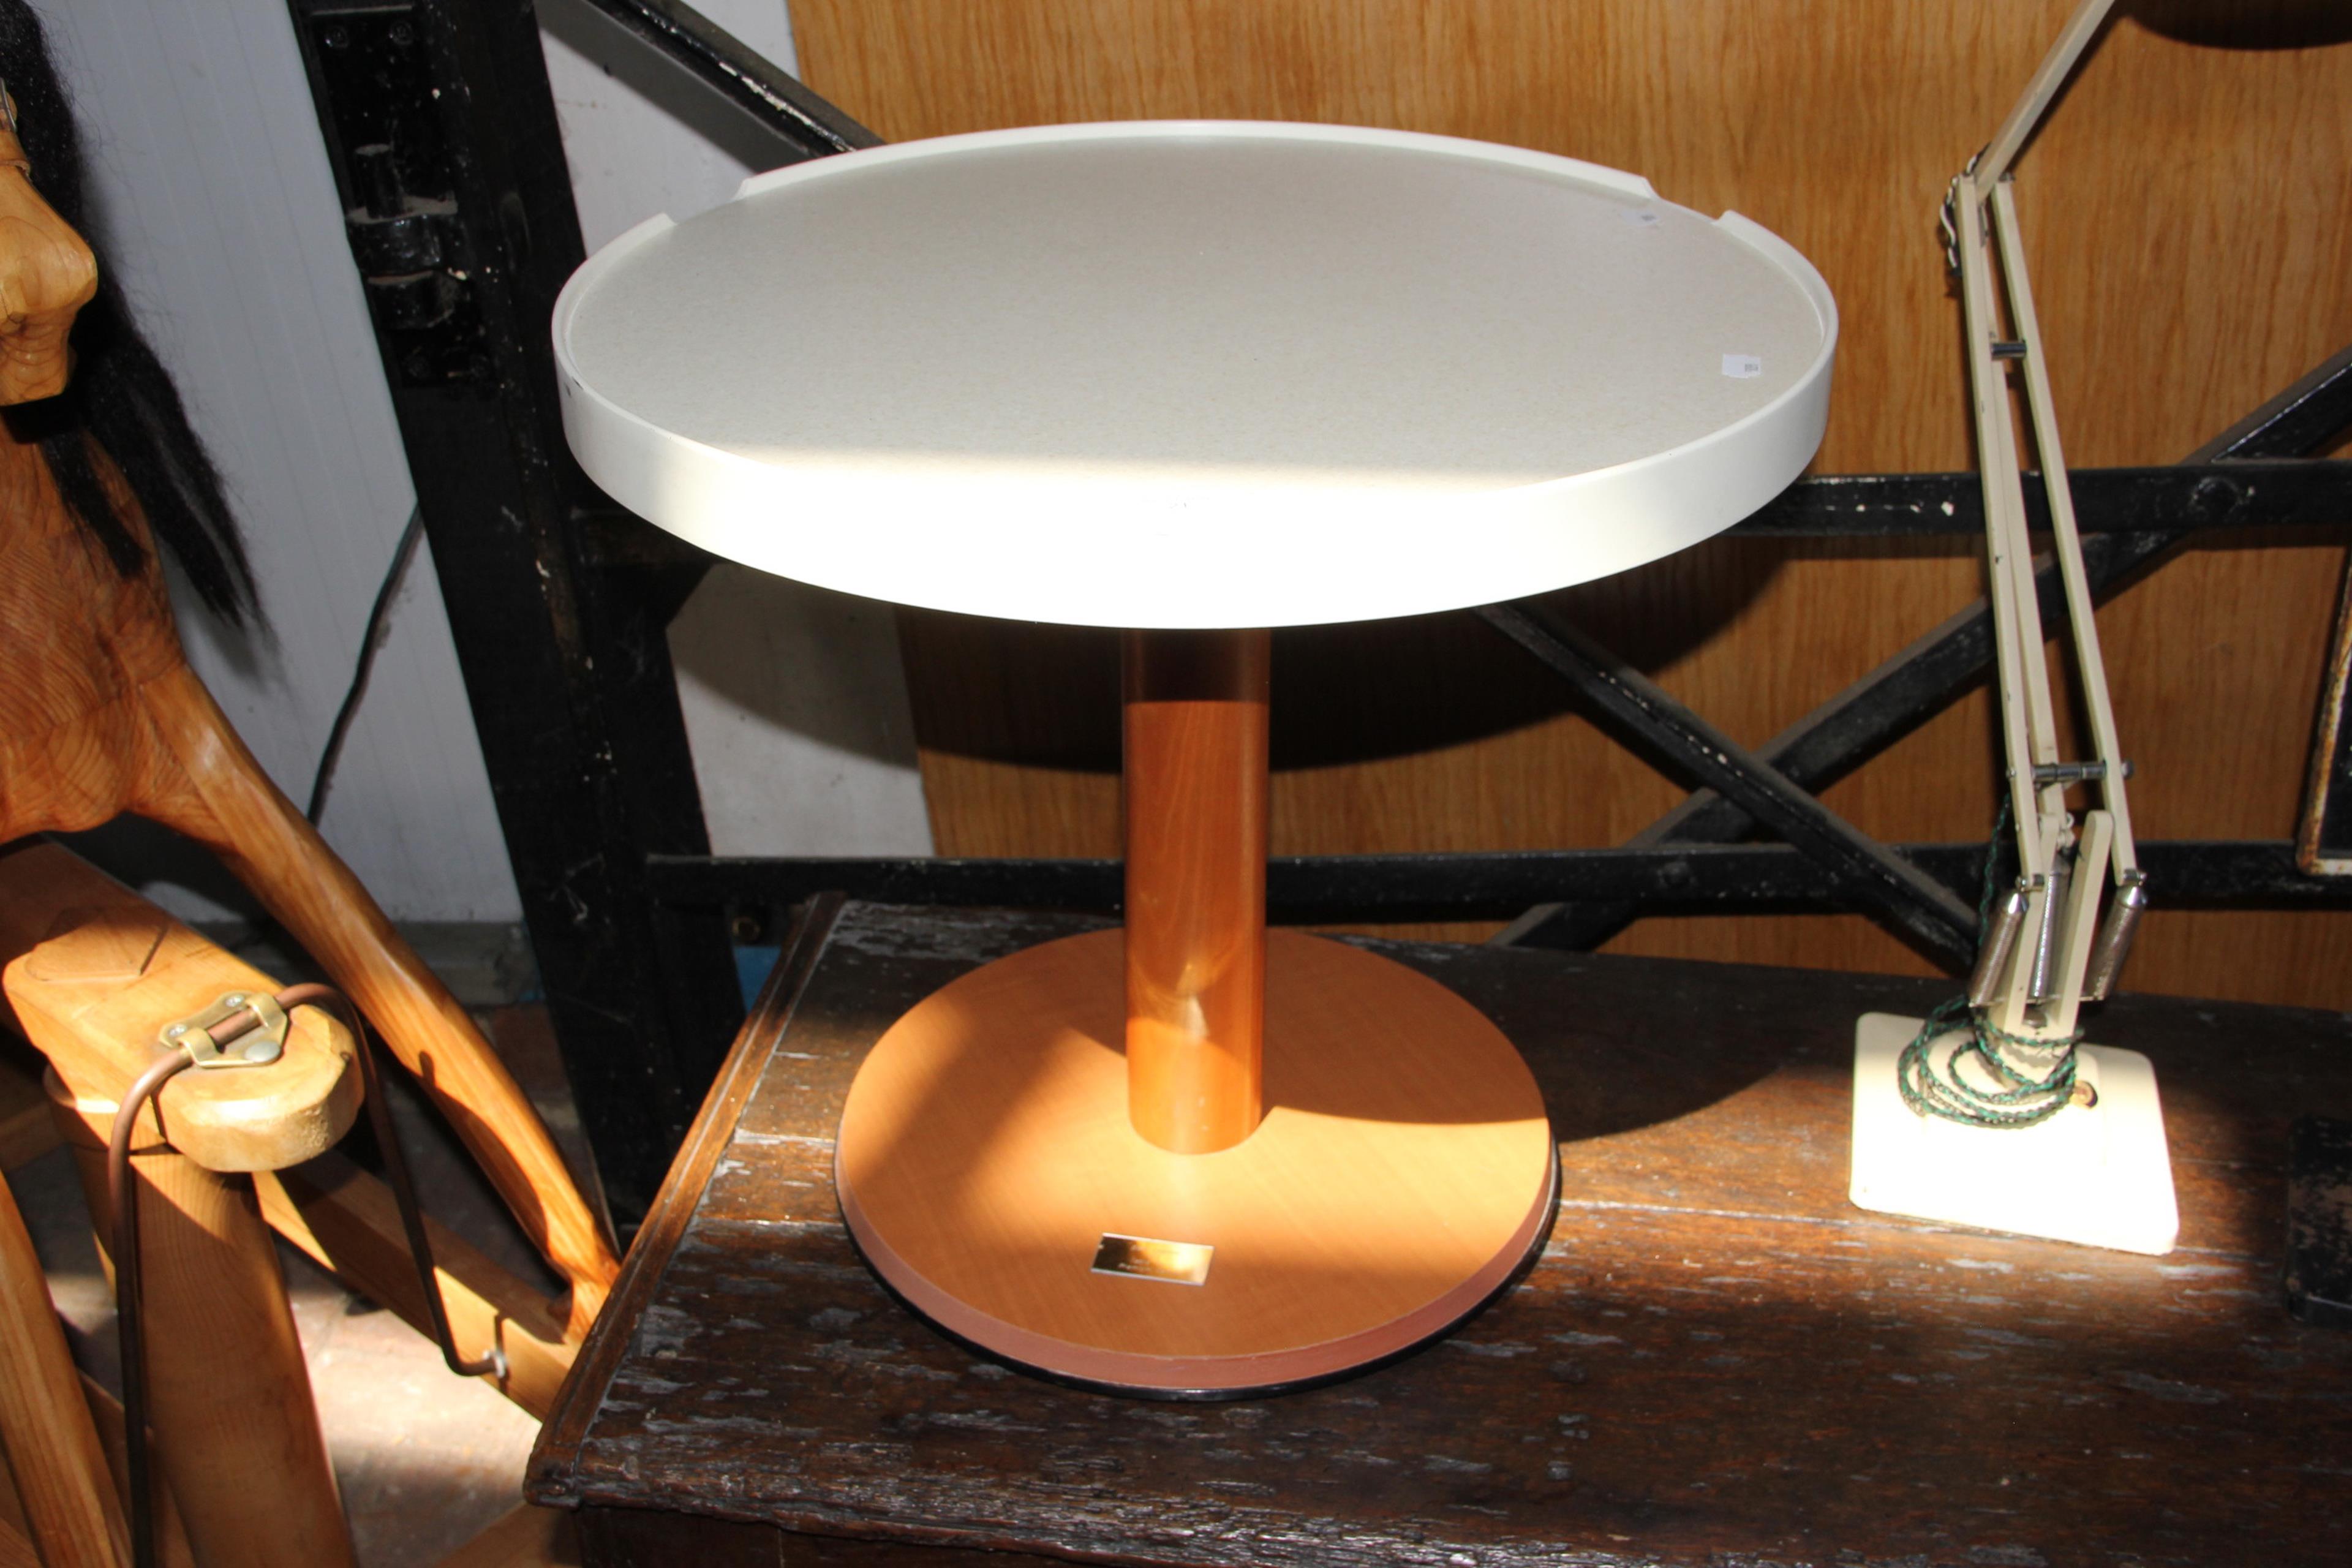 An original circular table from the QE2 with plaqu